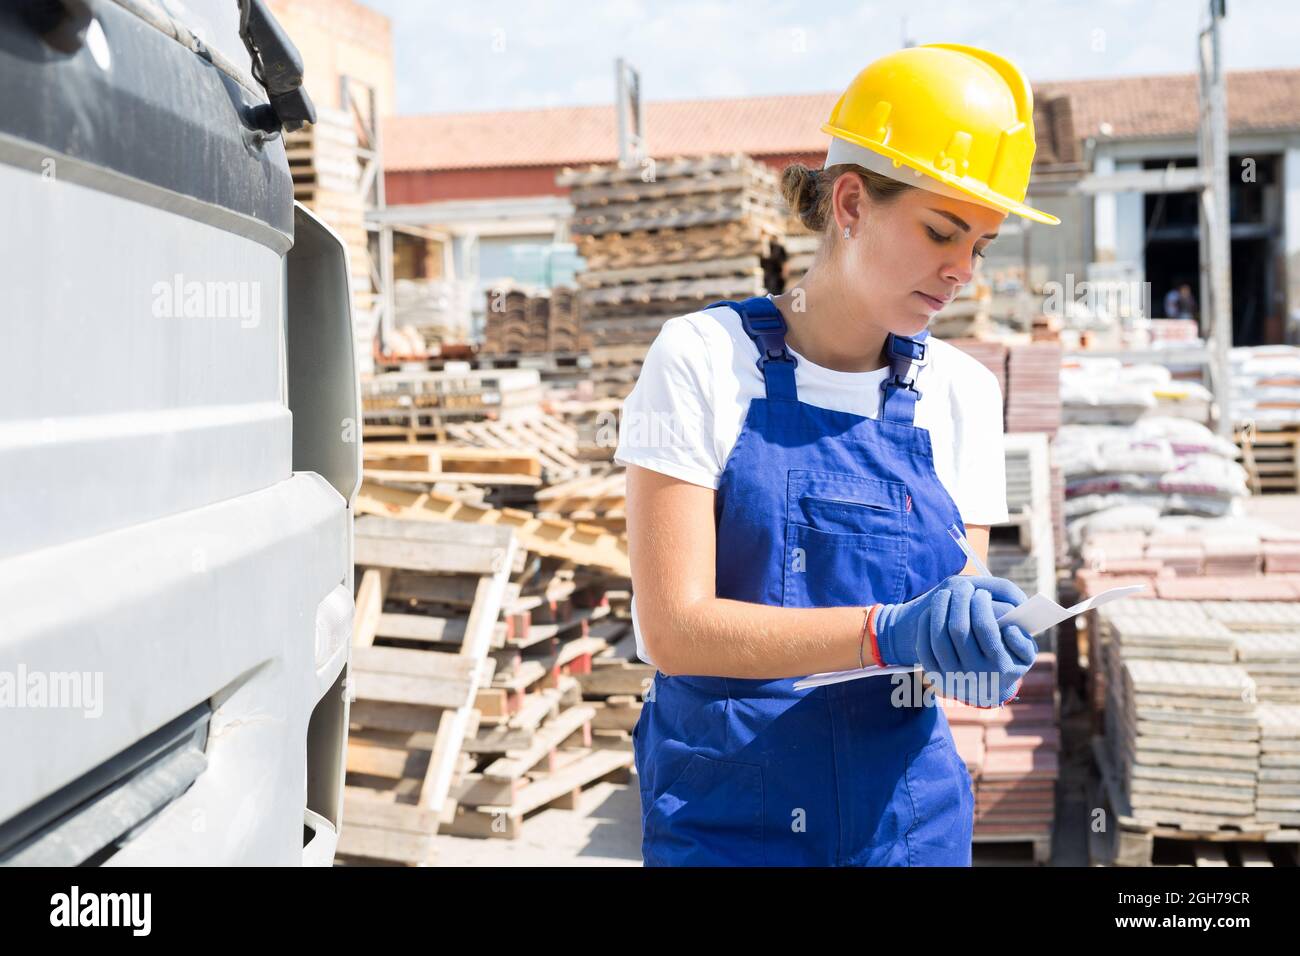 Female driver keeps records of materials when loading into back of truck at site of hardware store Stock Photo